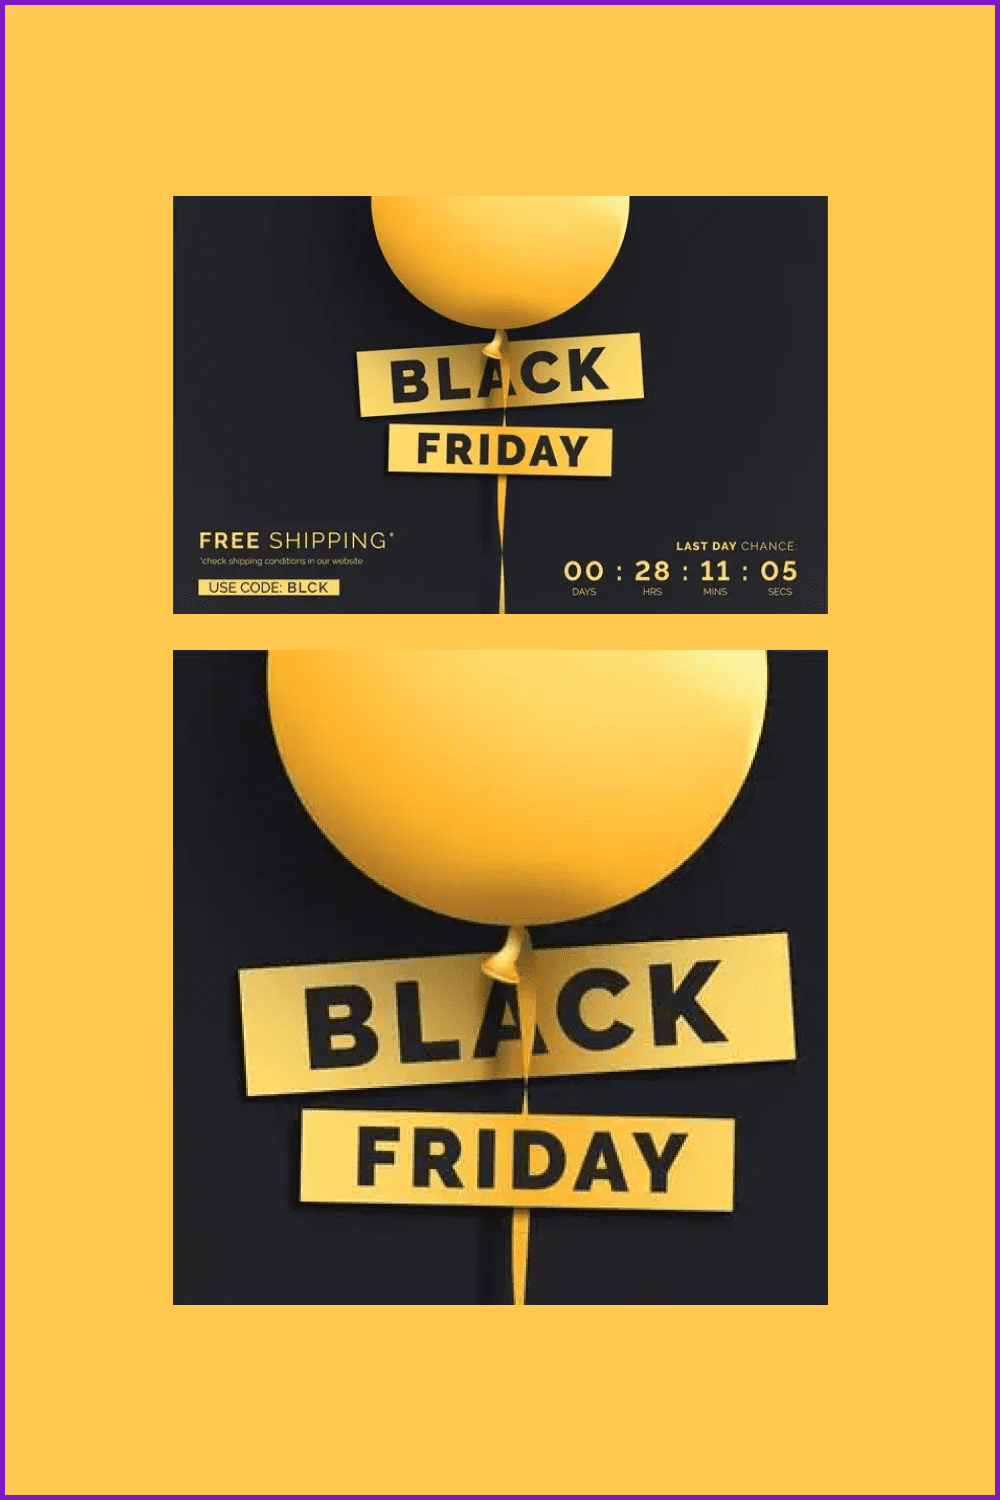 Banner for Black Friday with yellow balloon and black background.